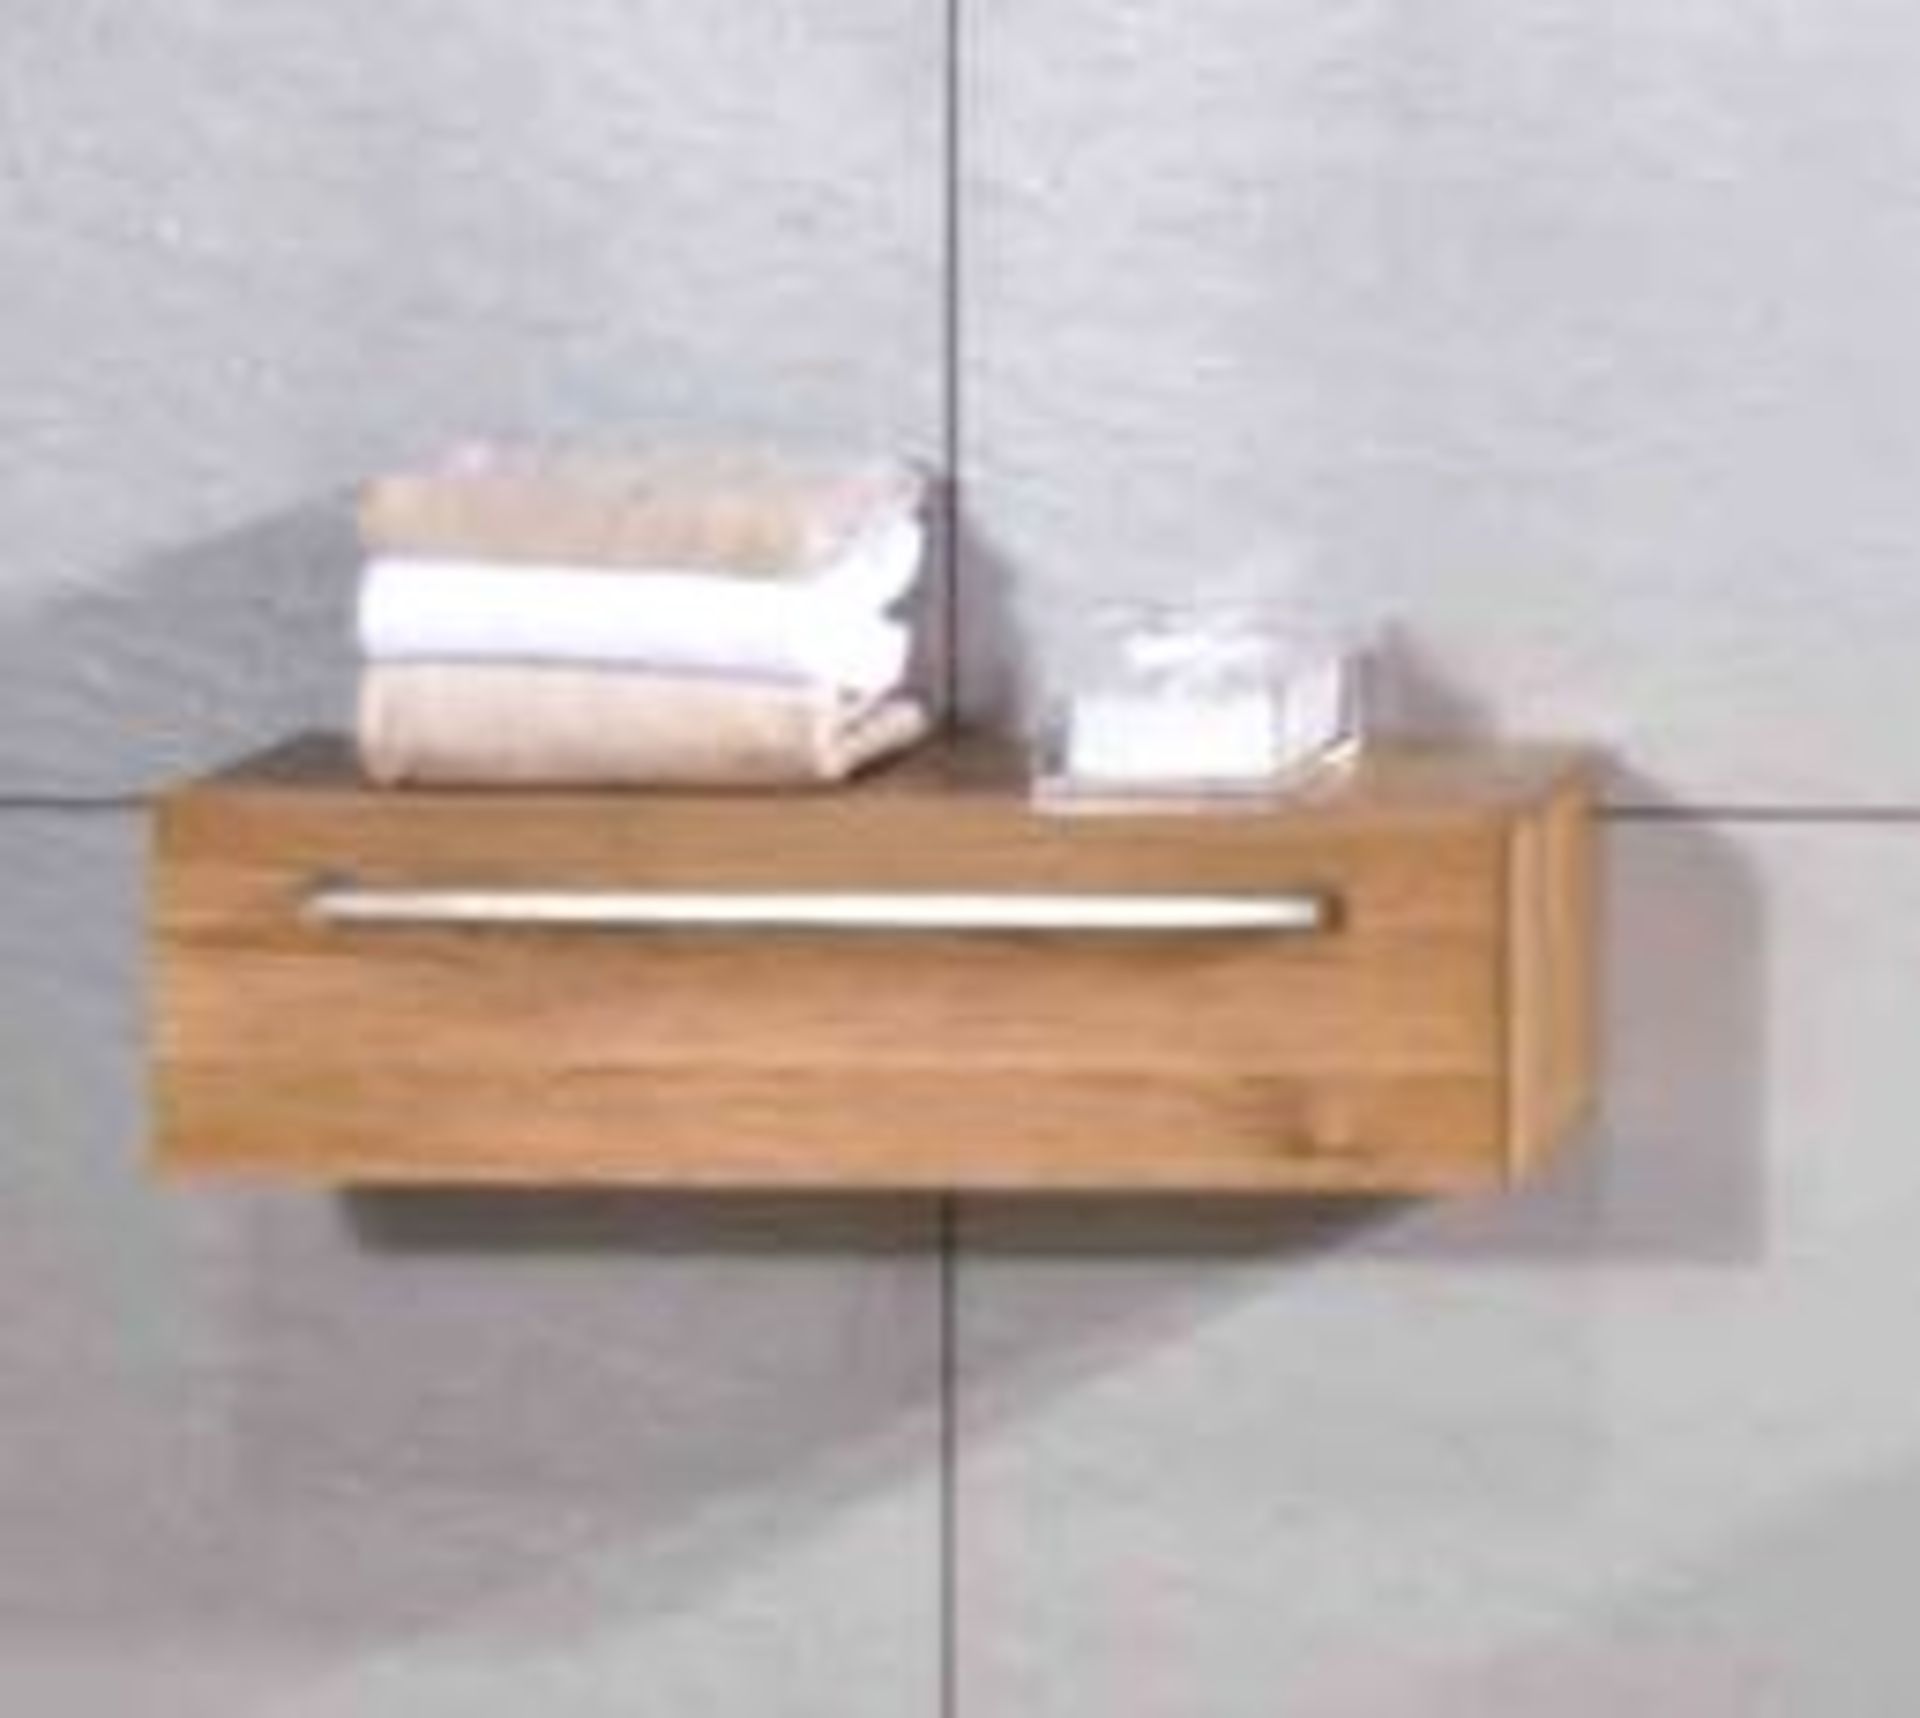 1 x Stonearth 400mm Wall Mounted Single Drawer Unit - American Solid Oak - Original RRP £240 - Size: - Image 2 of 13